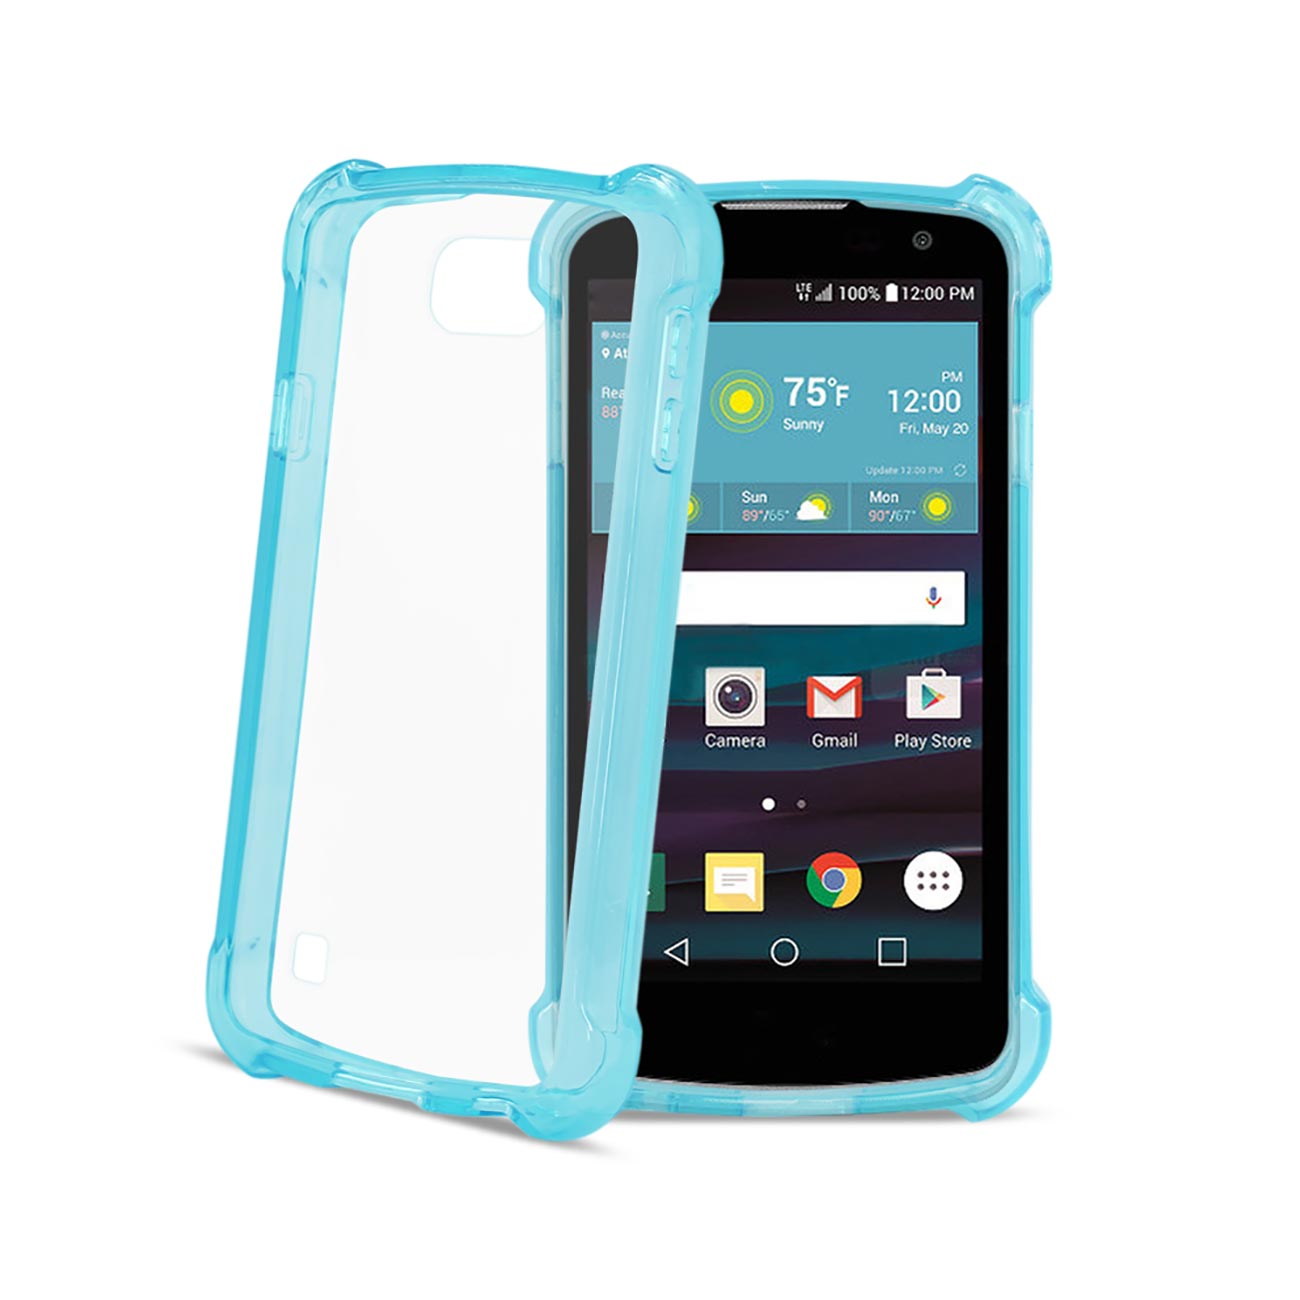 Case Clear Bumper Air Cushion Protection LG Spree Navy Color